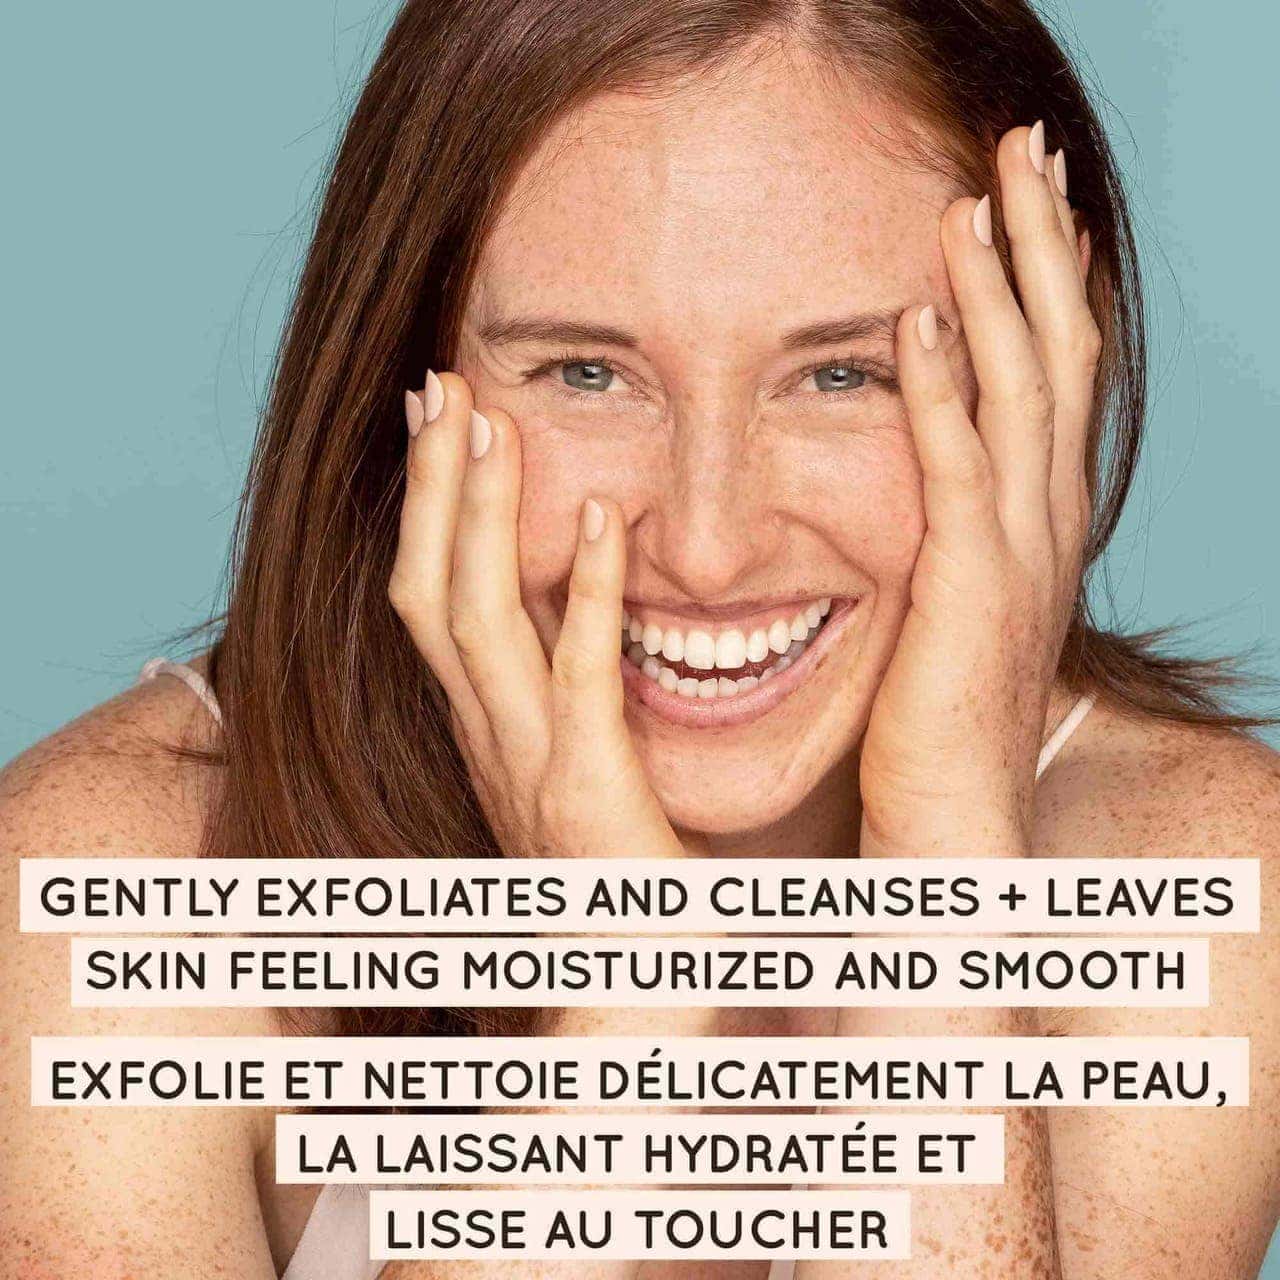 Woman smiling with text explaining the product gently exfoliates and cleanses the skin.